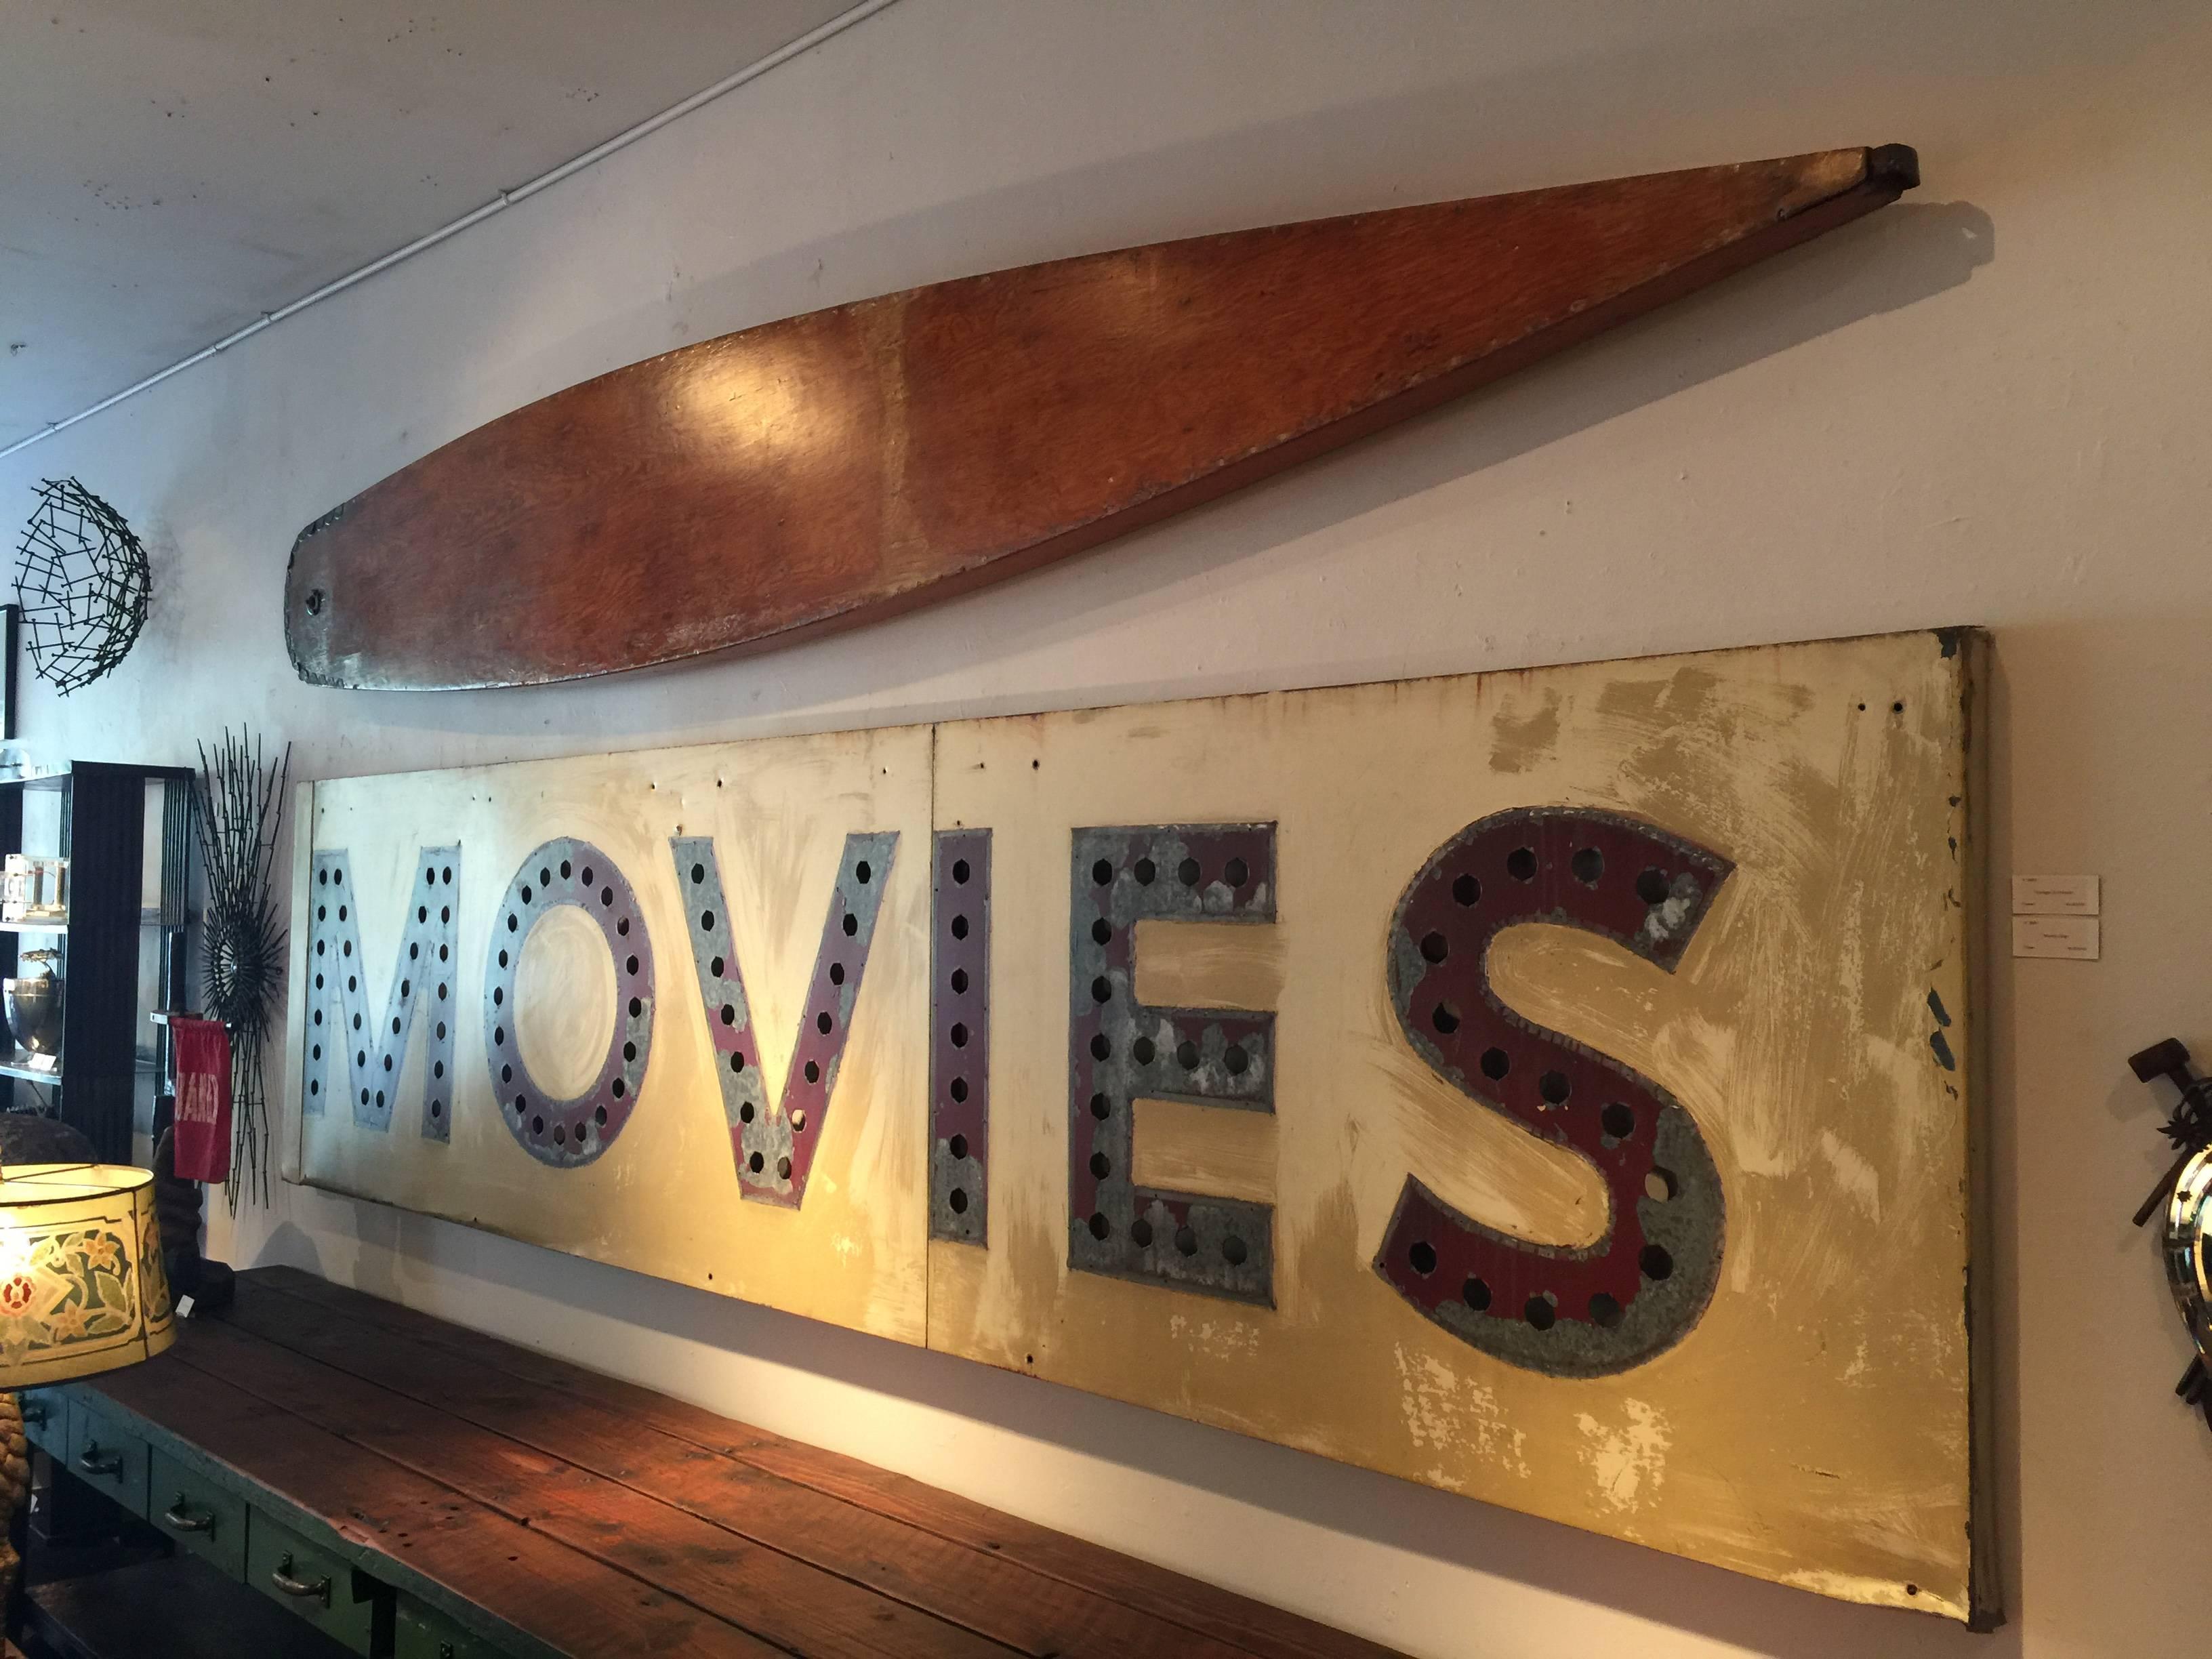 Early handmade wooden surfboard or paddle board. We've added a long French cleat for safe and secure wall presentation. This was found in an estate in LaJolla California. 

  

     